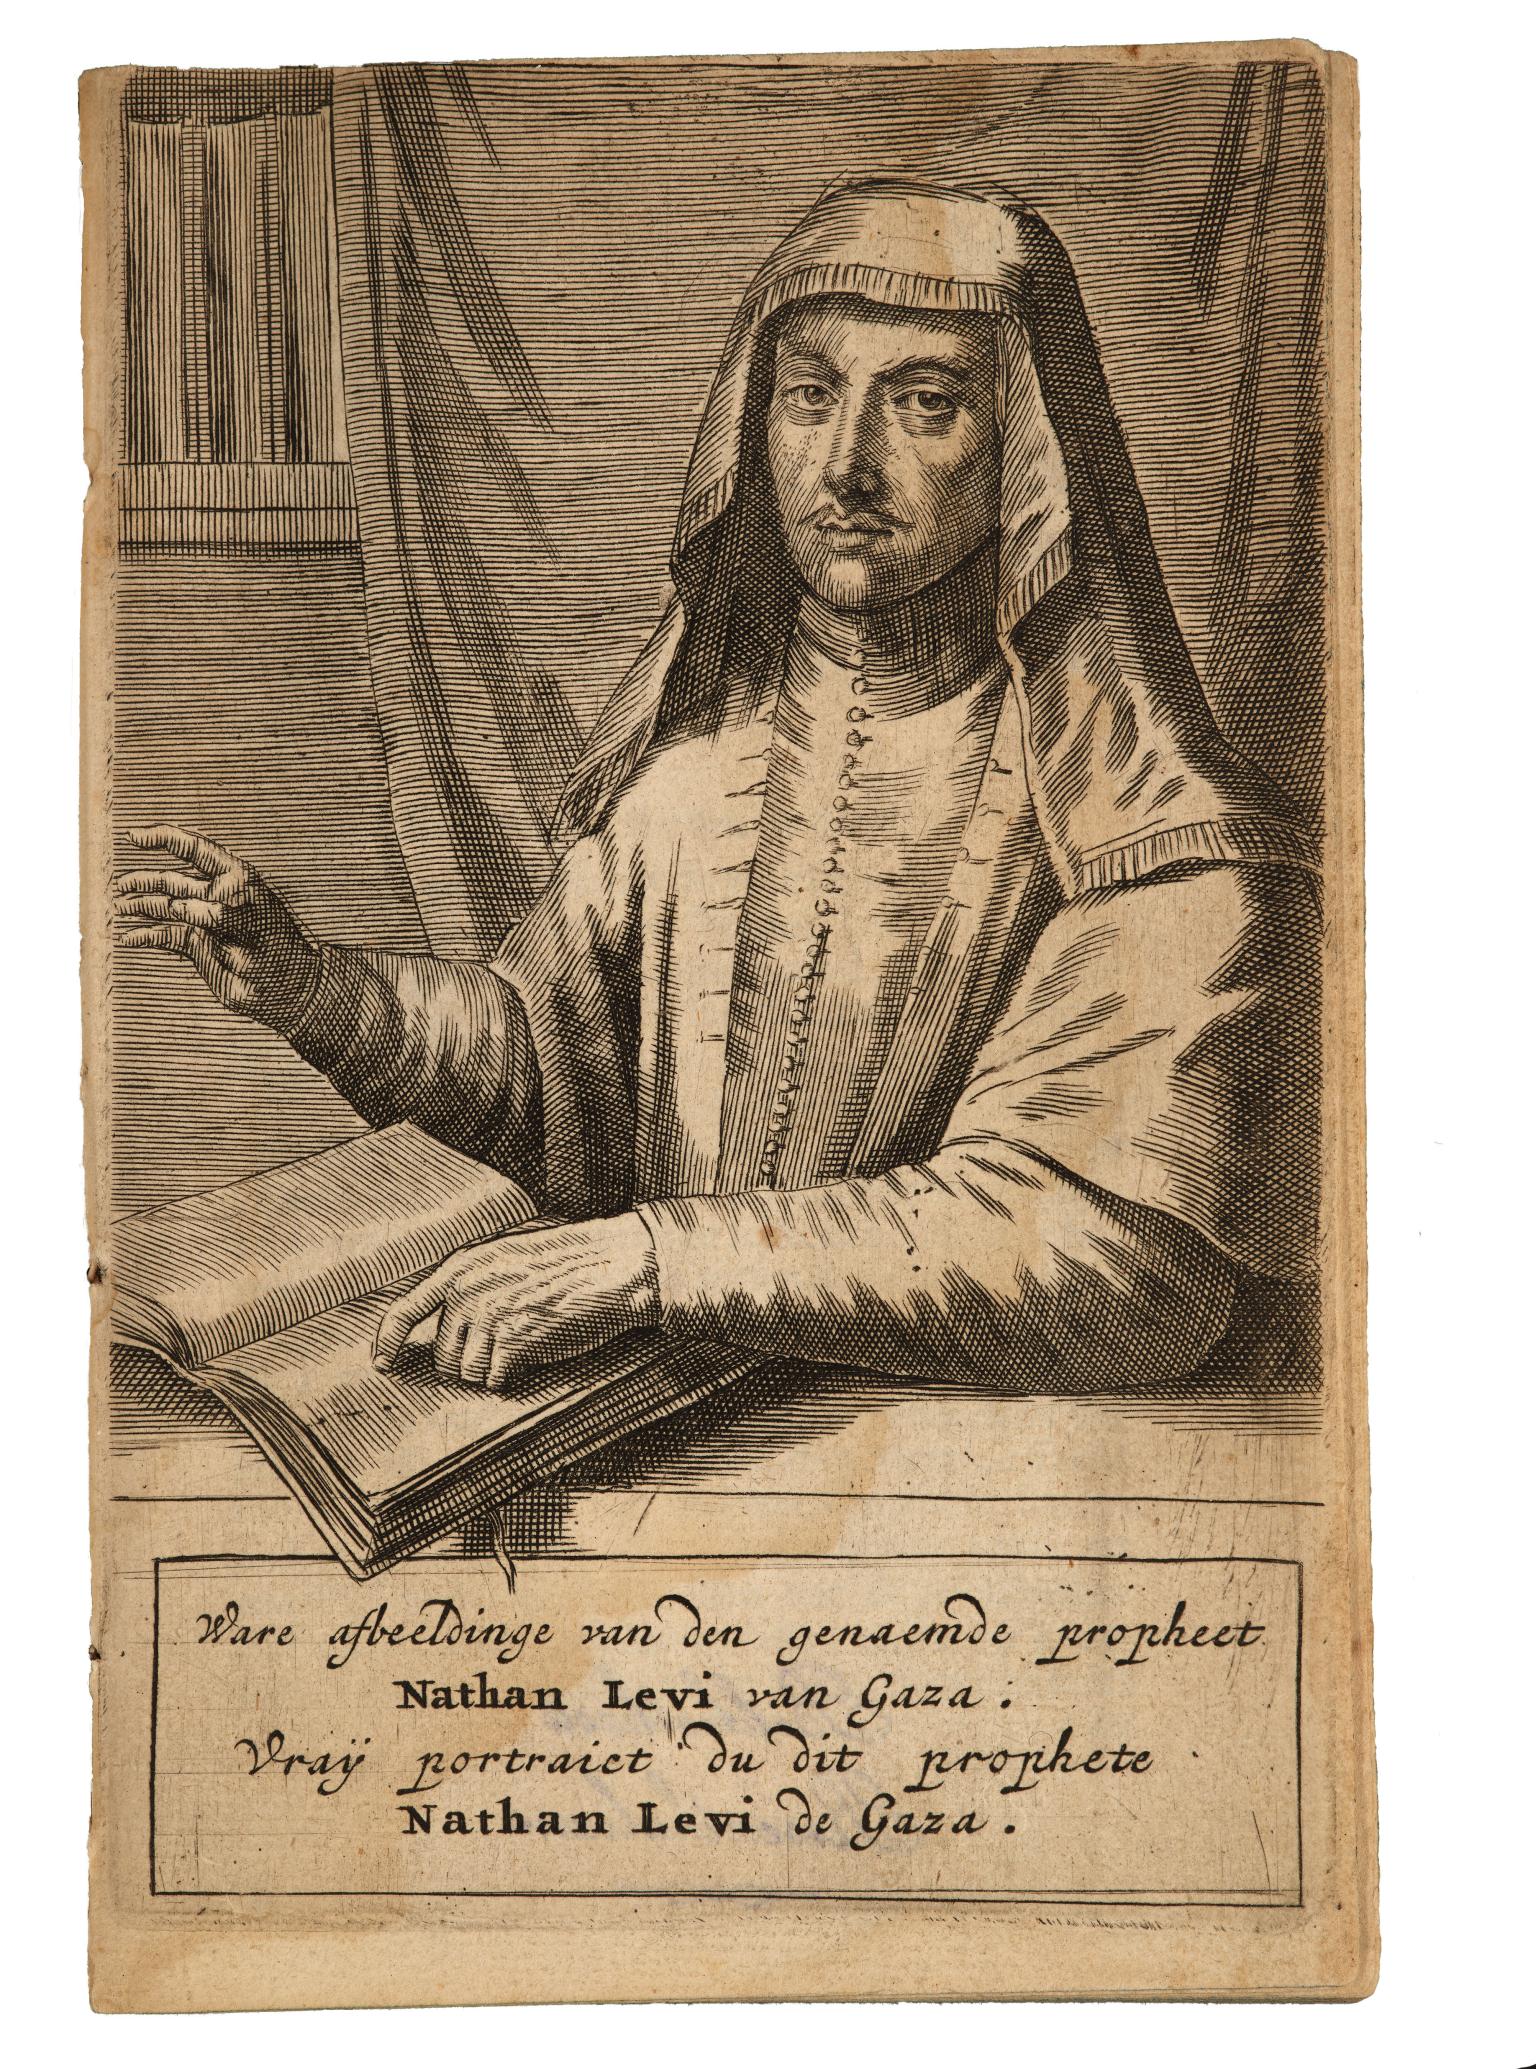 Print engraving of man in head covering pointing to open book with one hand and gesturing with the other, with Dutch and French text underneath.